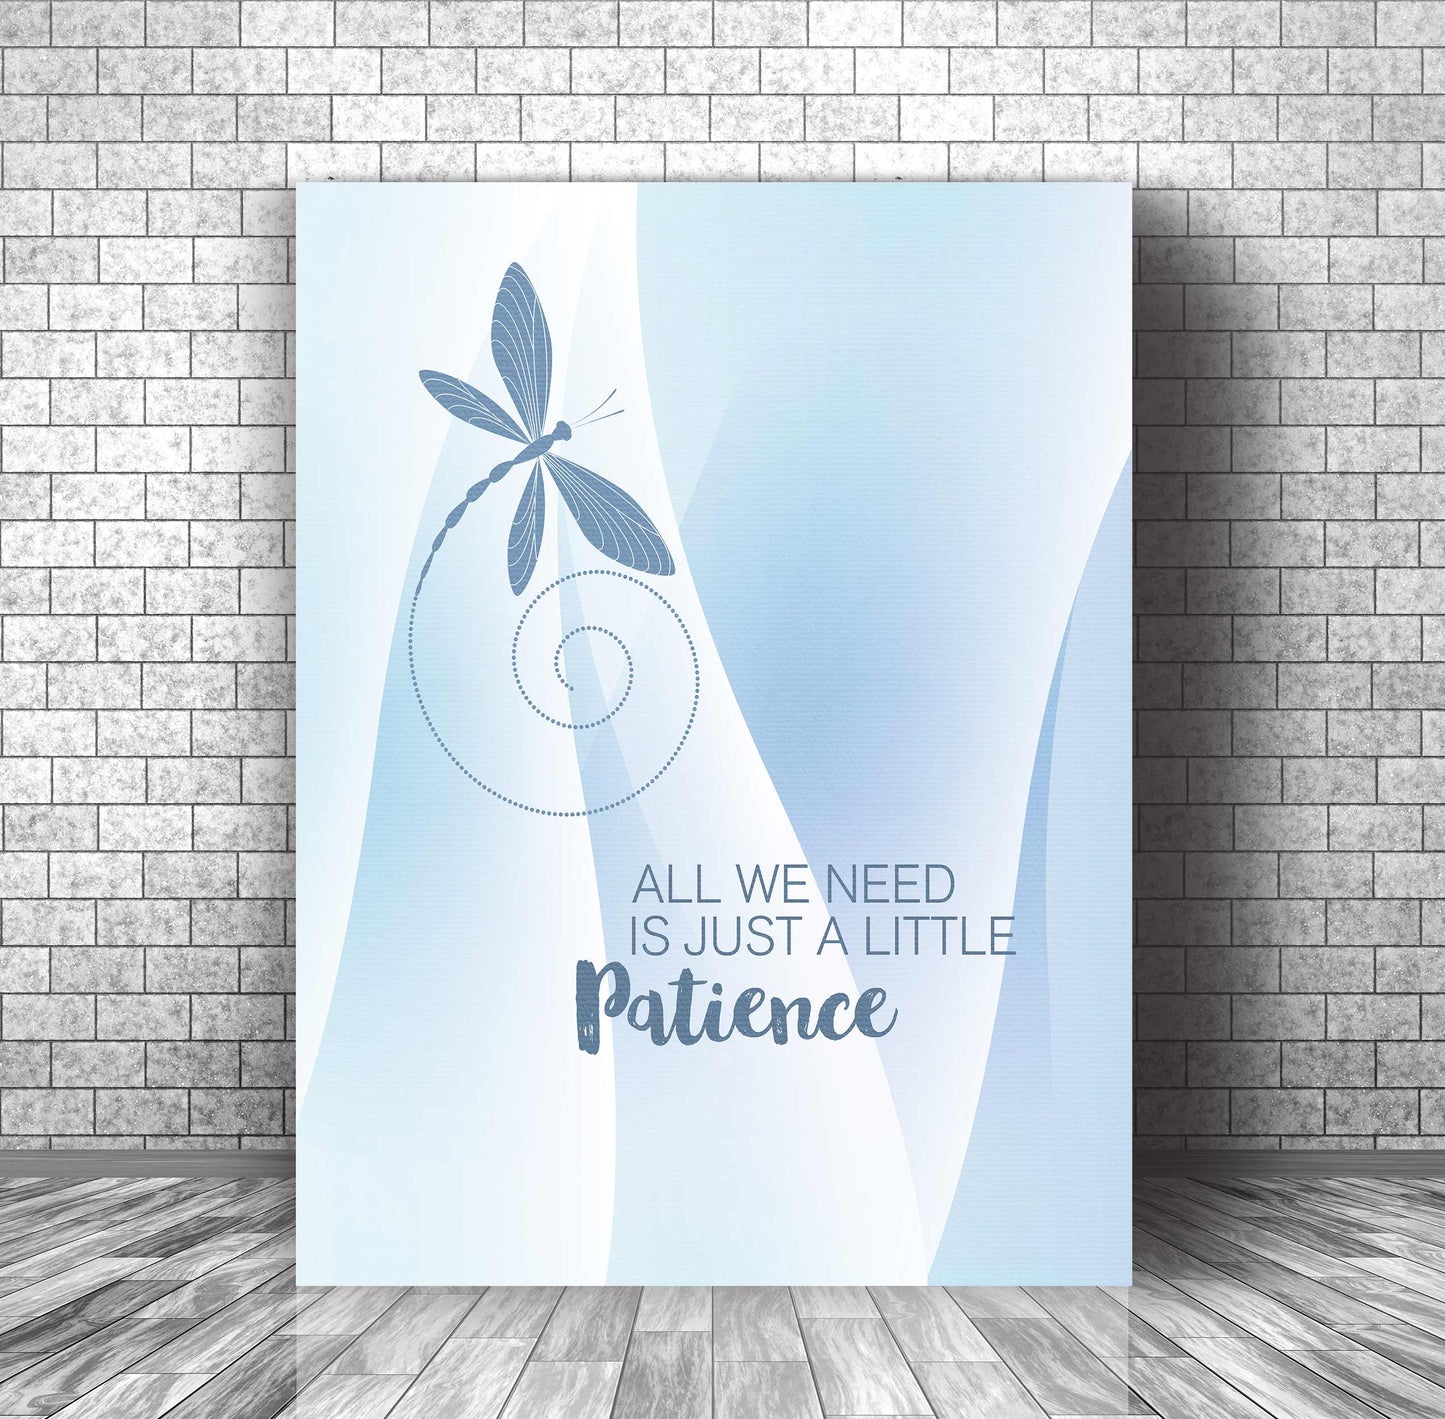 Patience by Guns n' Roses - Song Lyric Poster Illustration Song Lyrics Art Song Lyrics Art 11x14 Canvas Wrap 